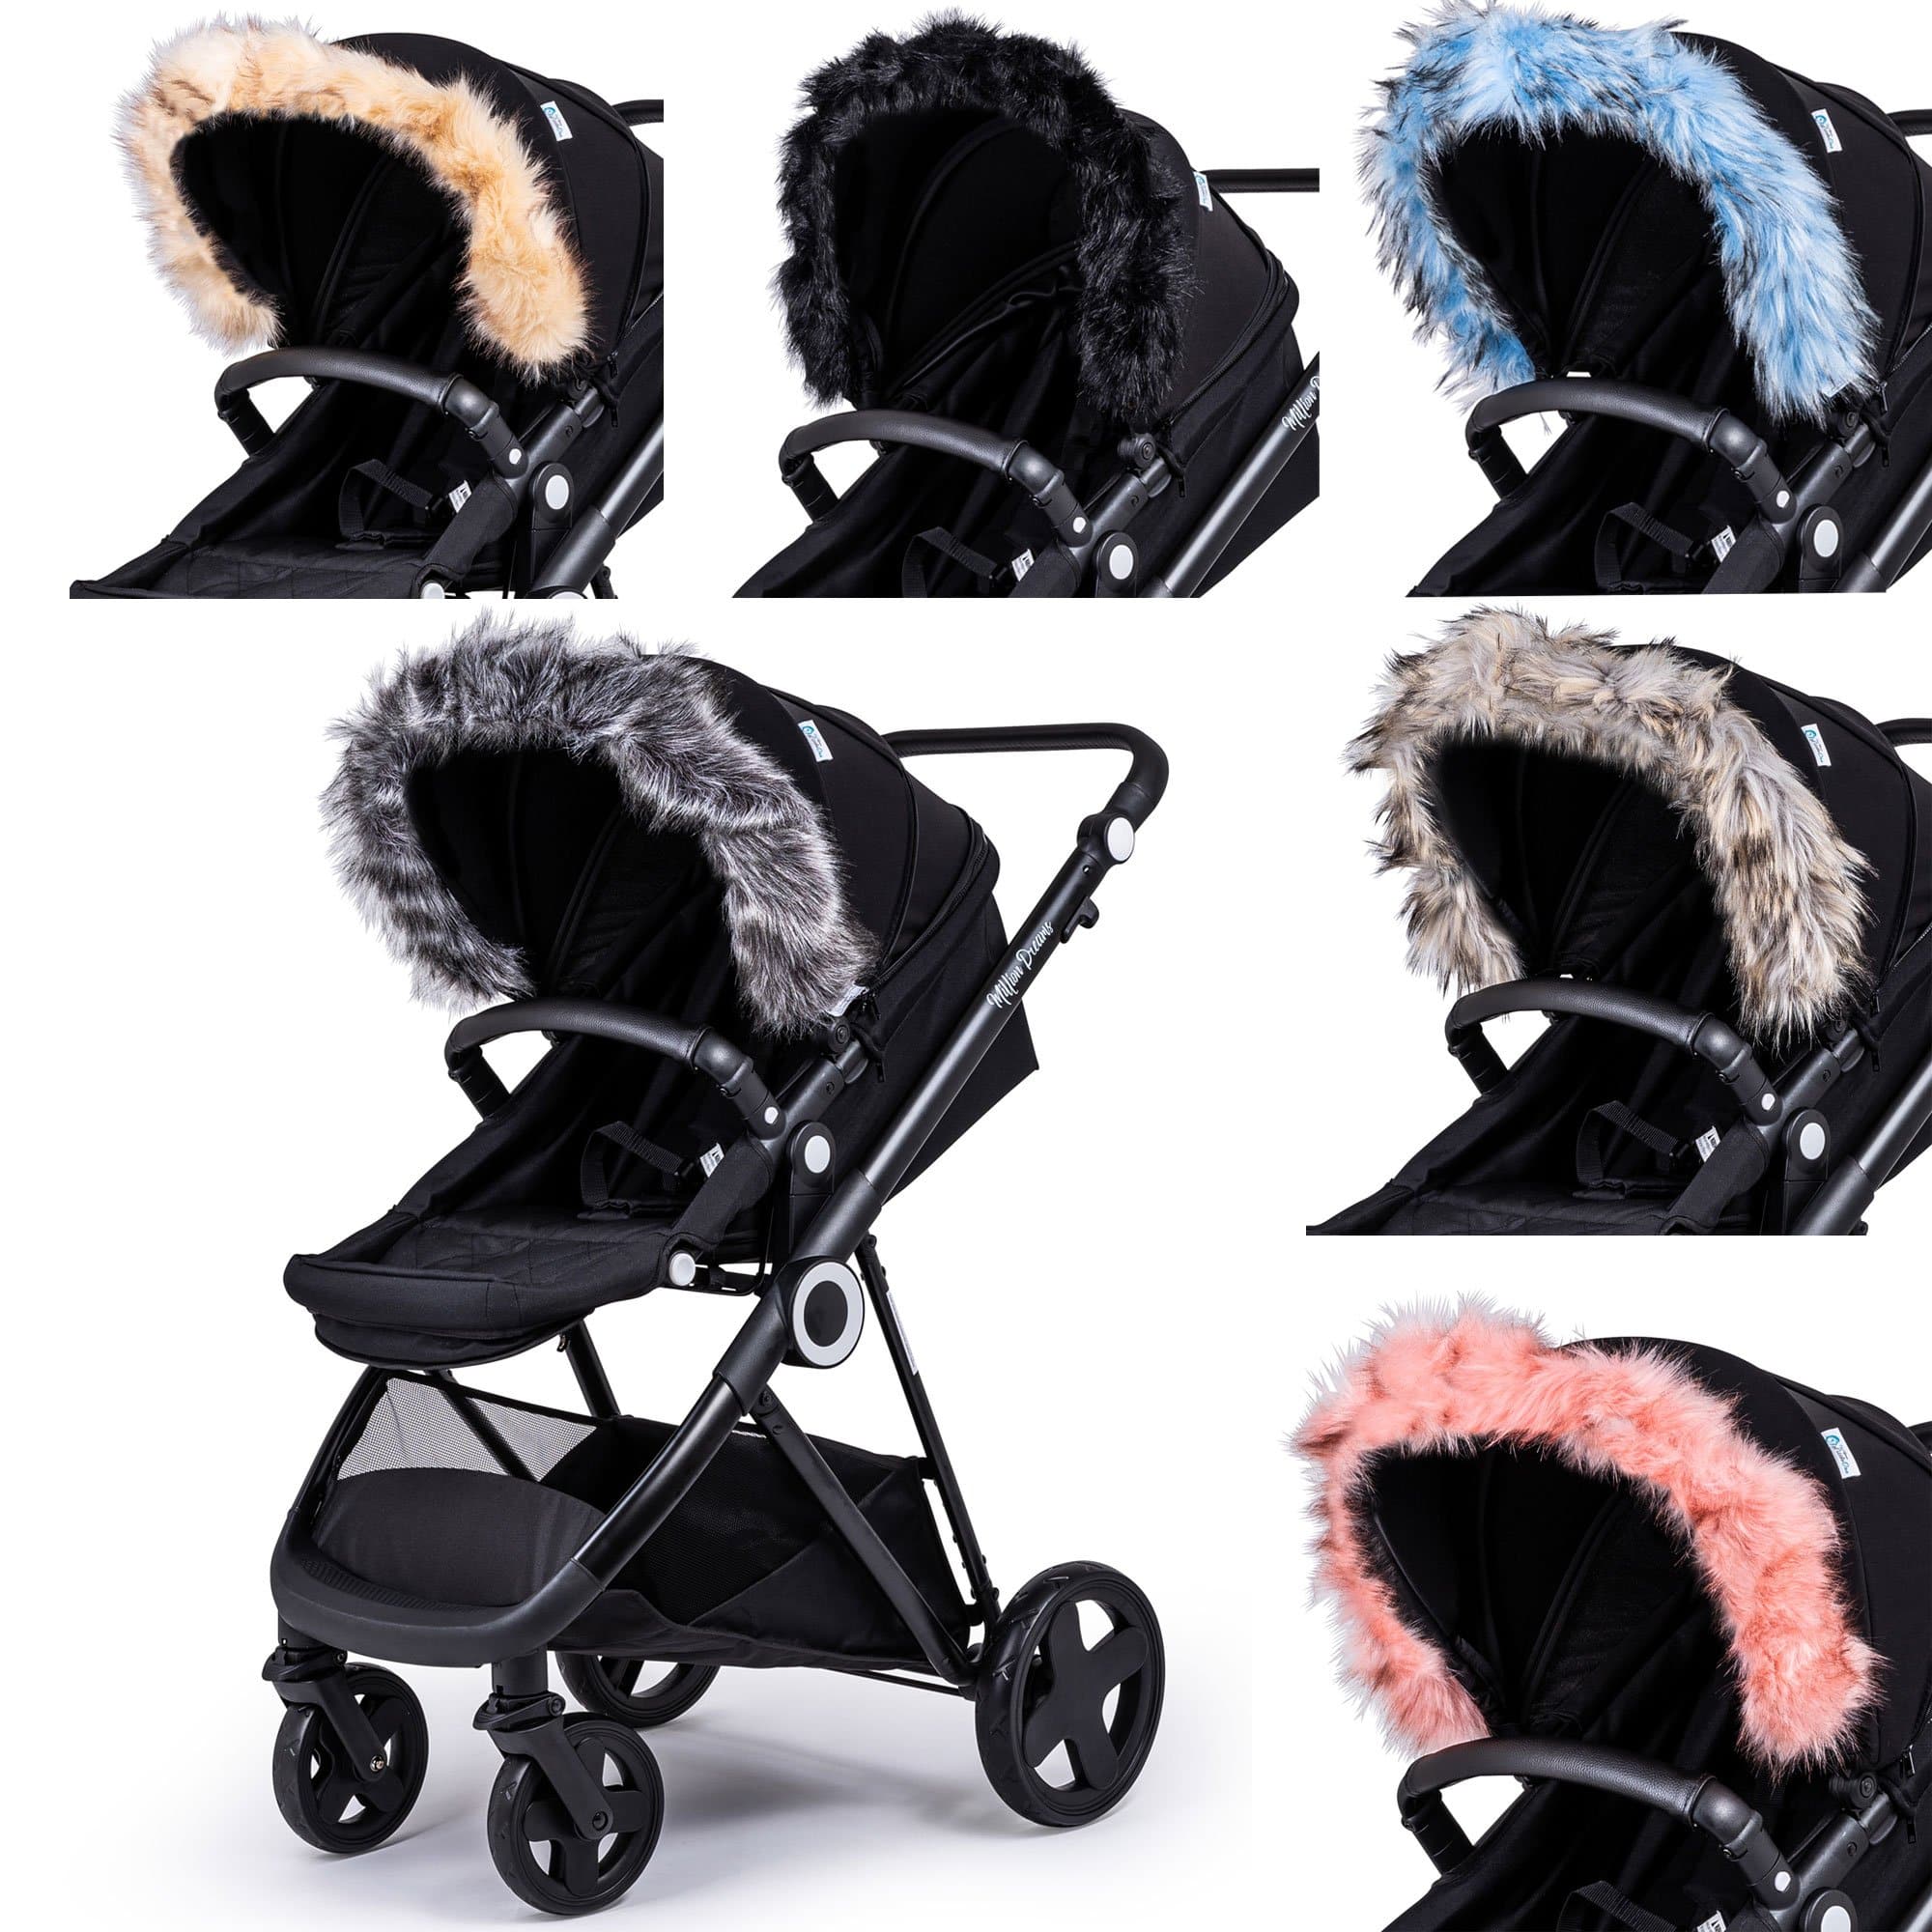 Pram Fur Hood Trim Attachment for Pushchair Compatible with Babylo - For Your Little One